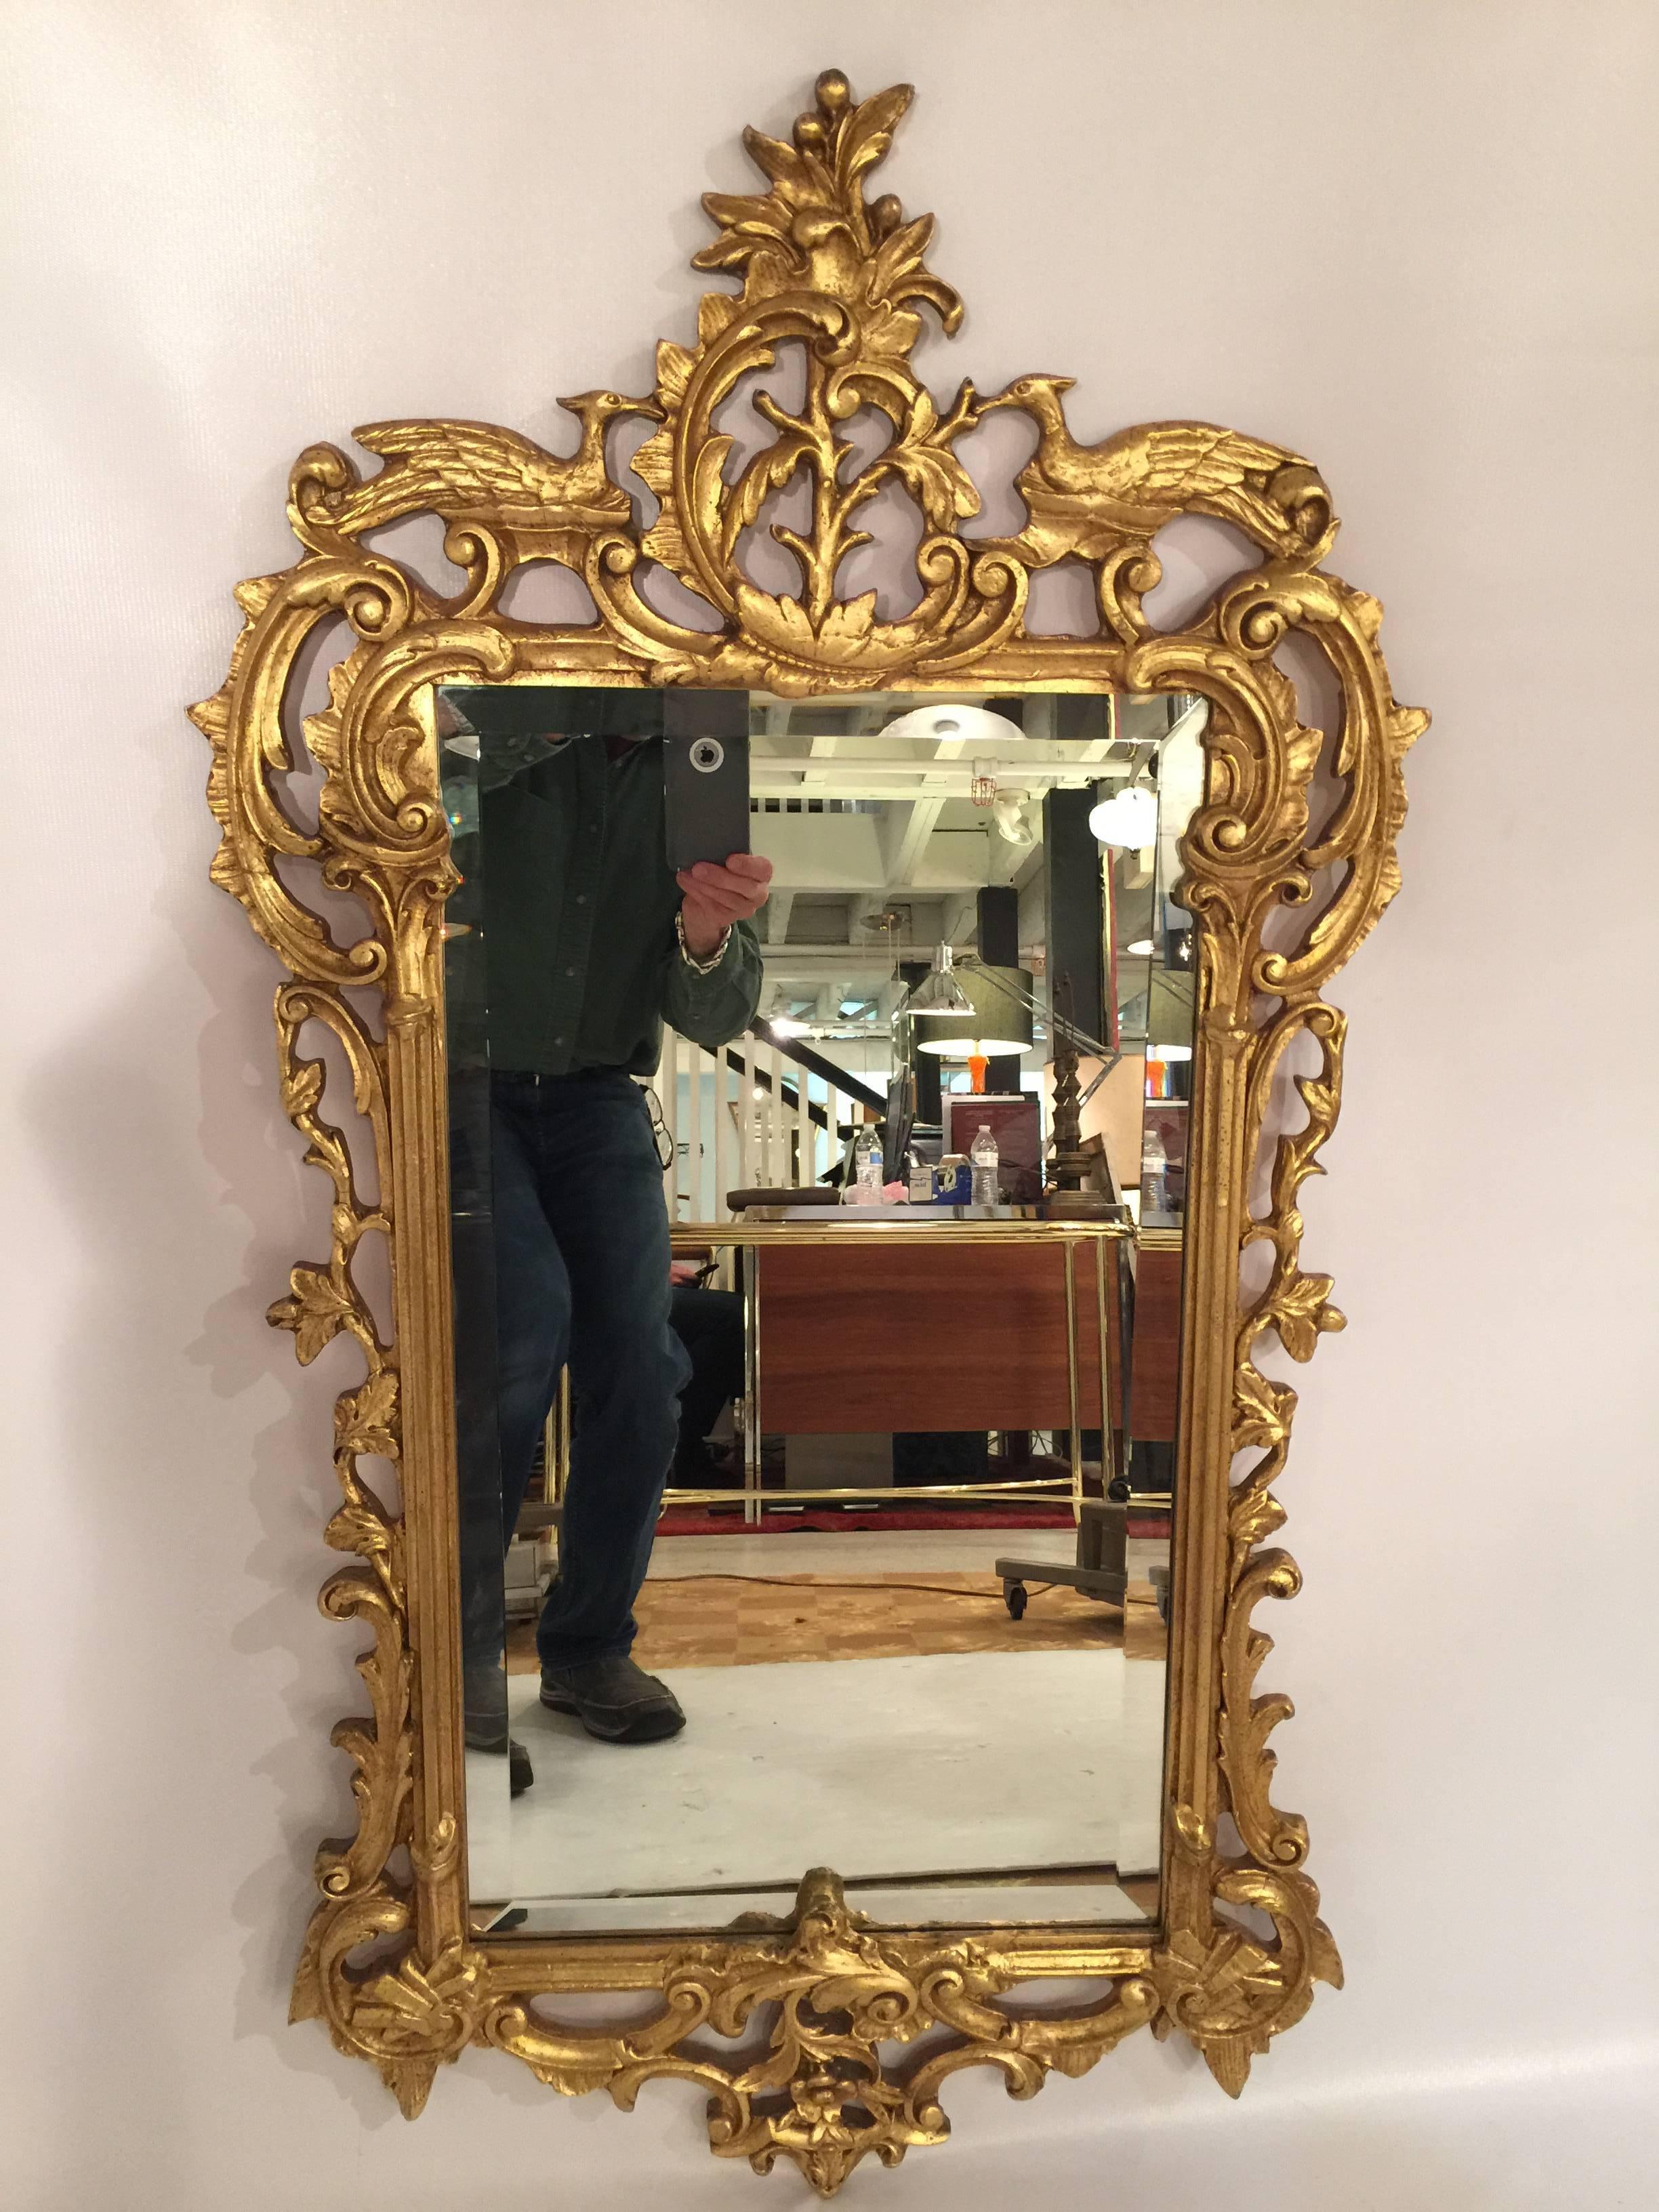 This hand-carved gold gilt mirror from the 1940s was made by Friedman Brothers Company. One of the premier mirror makers.
Has a nice beveled mirror in excellent condition.